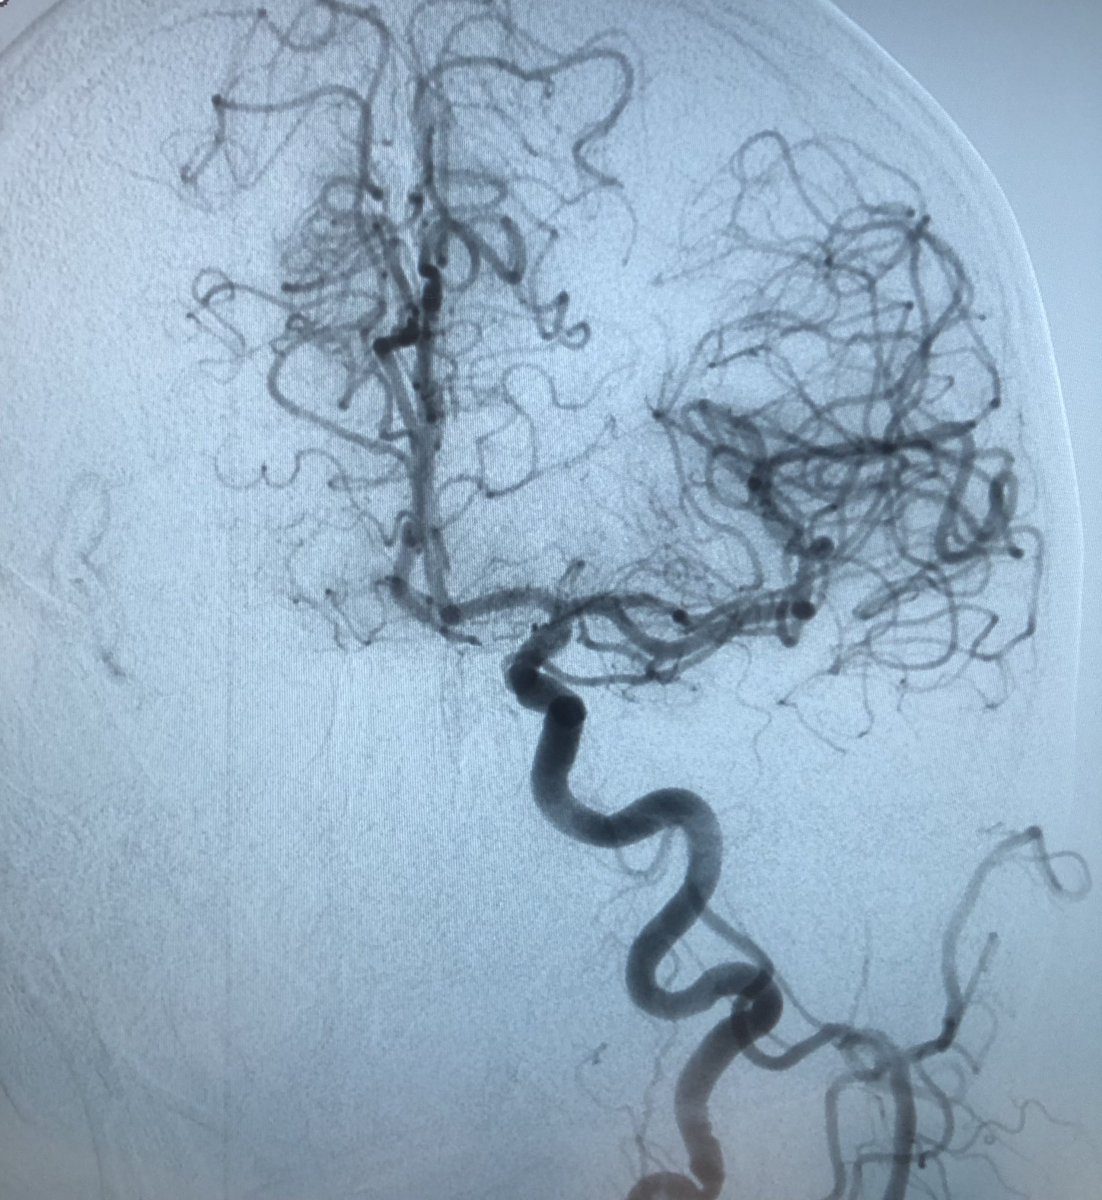 80yo M with M1 LMCA occlusion after 48hrs break in DOAC treatment(FAP) due to planned CRT implantation. NIHSS 23, MT: ASP+SR-DAC Catalyst 6, SR TrevoNXT4x41, 1pass, TICI3. In TEE‘sludge’ and small thrombus in LAA. Qualified to LAAC in 3weeks. #heartbrainteam #neurotwitter